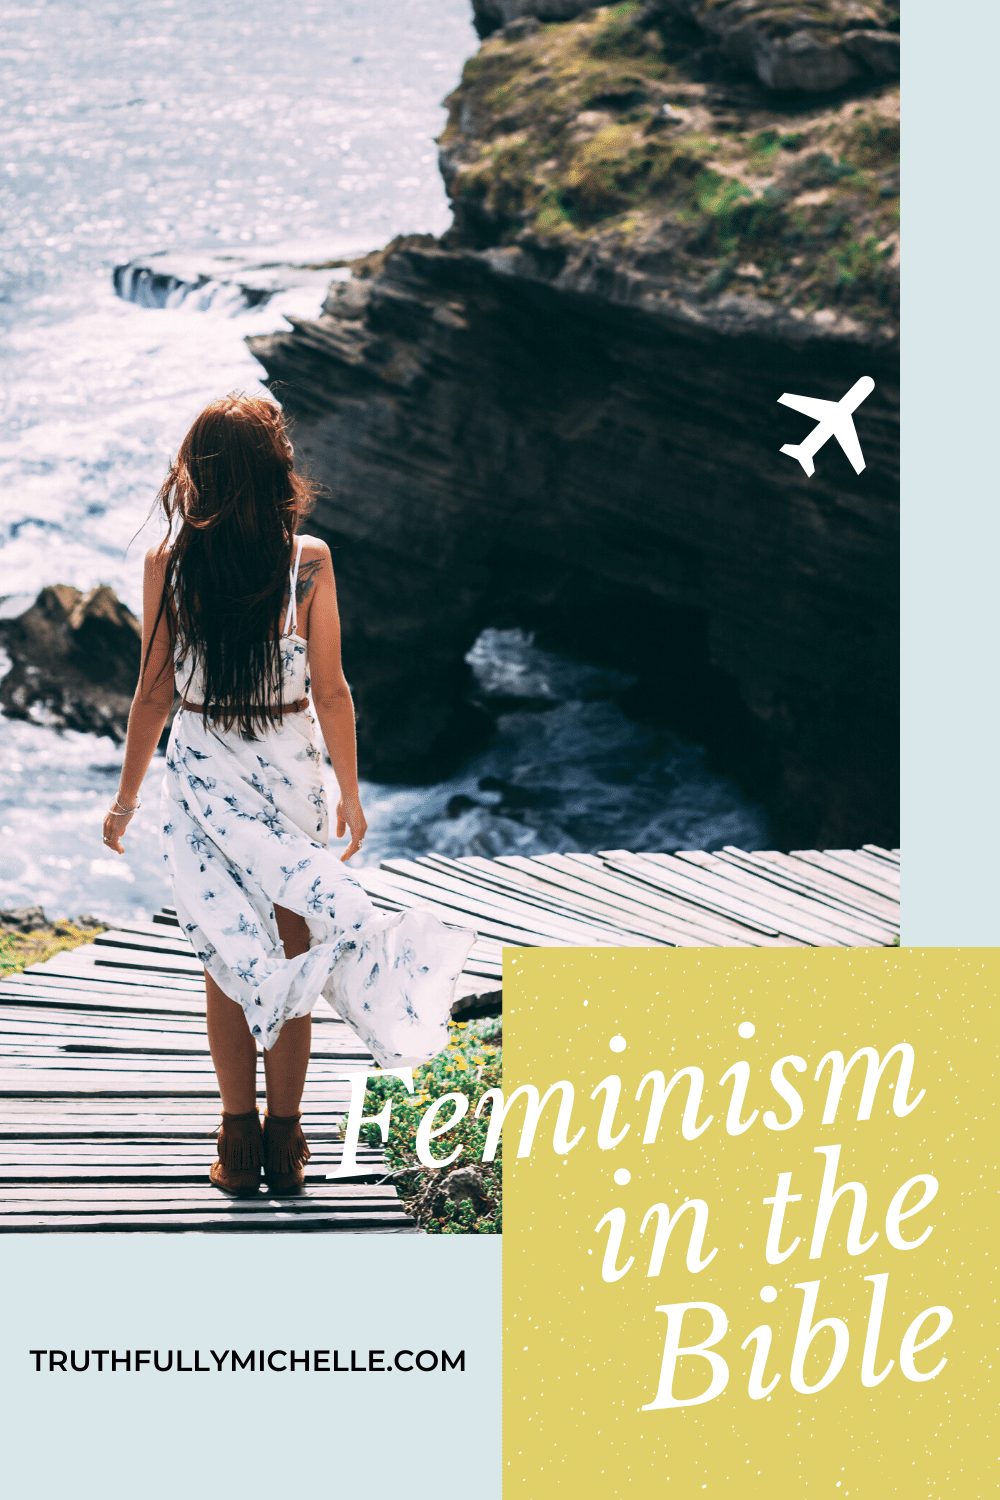 feminism and christianity, christianity and feminism in conversation, christian feminism, christian feminism today, christian view on feminism, feminism and the bible, what the bible says about feminism